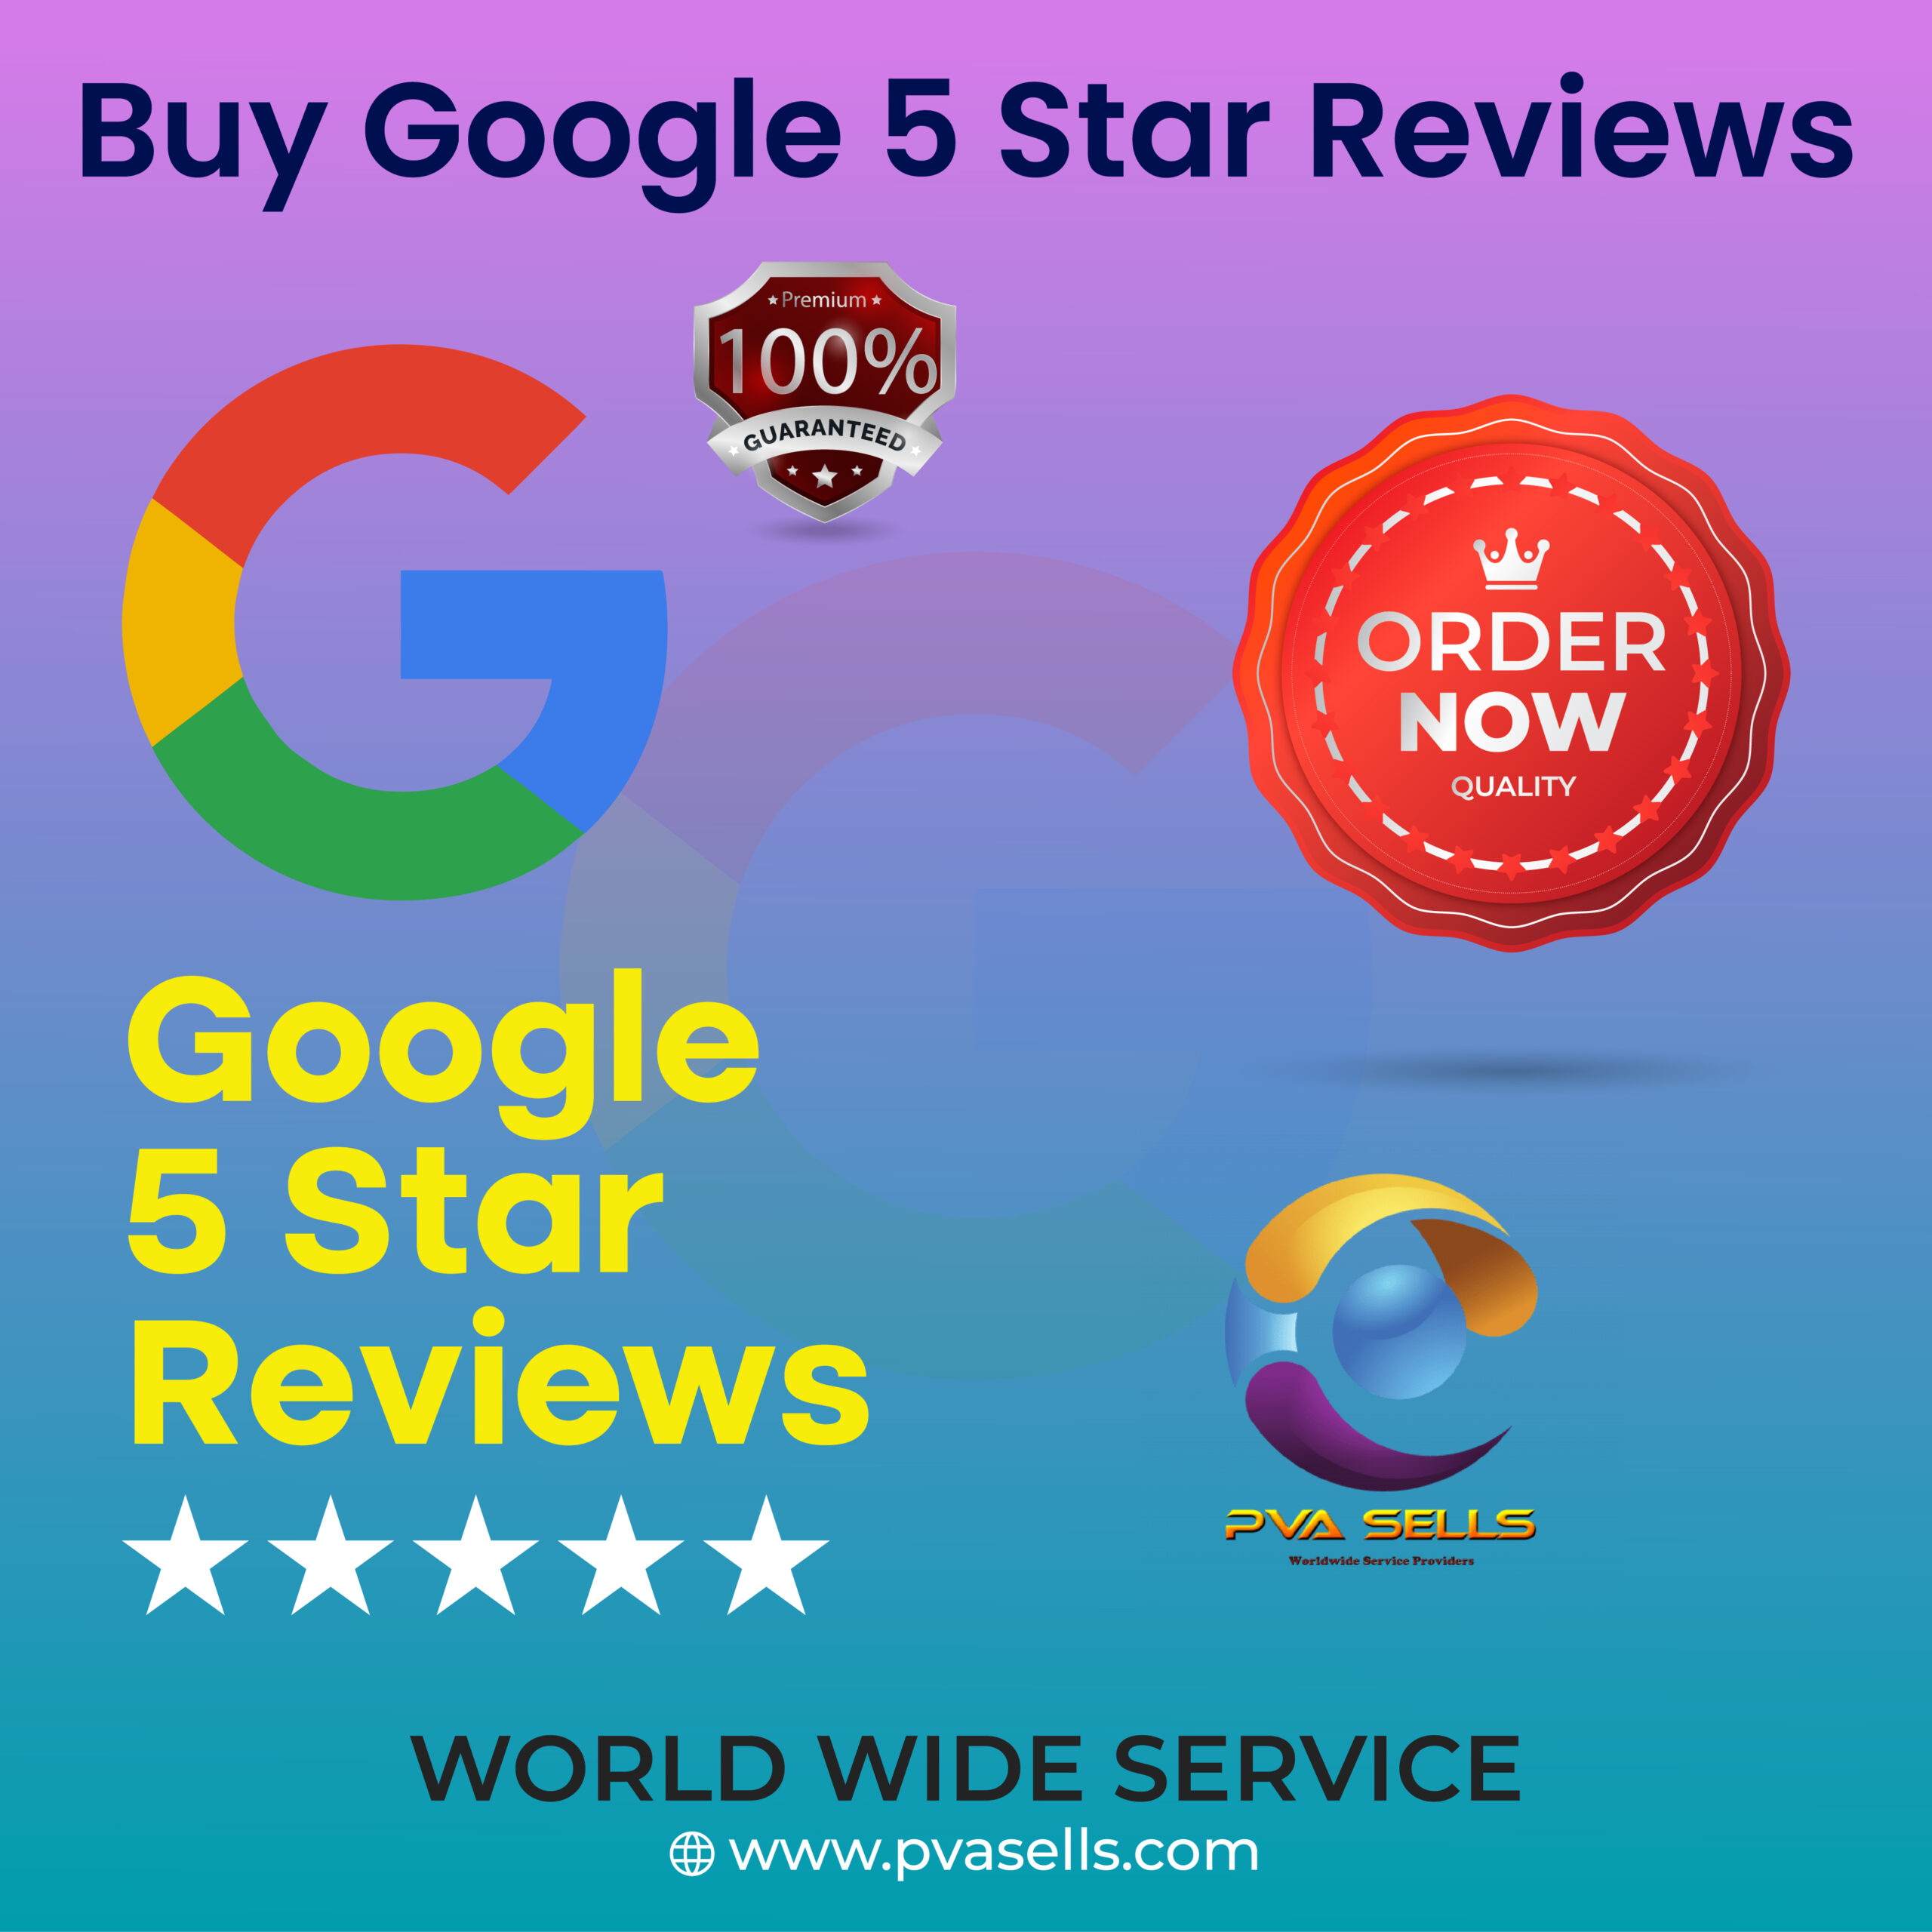 Buy Google 5 Star Reviews - 100% Permanent, Best Quality...